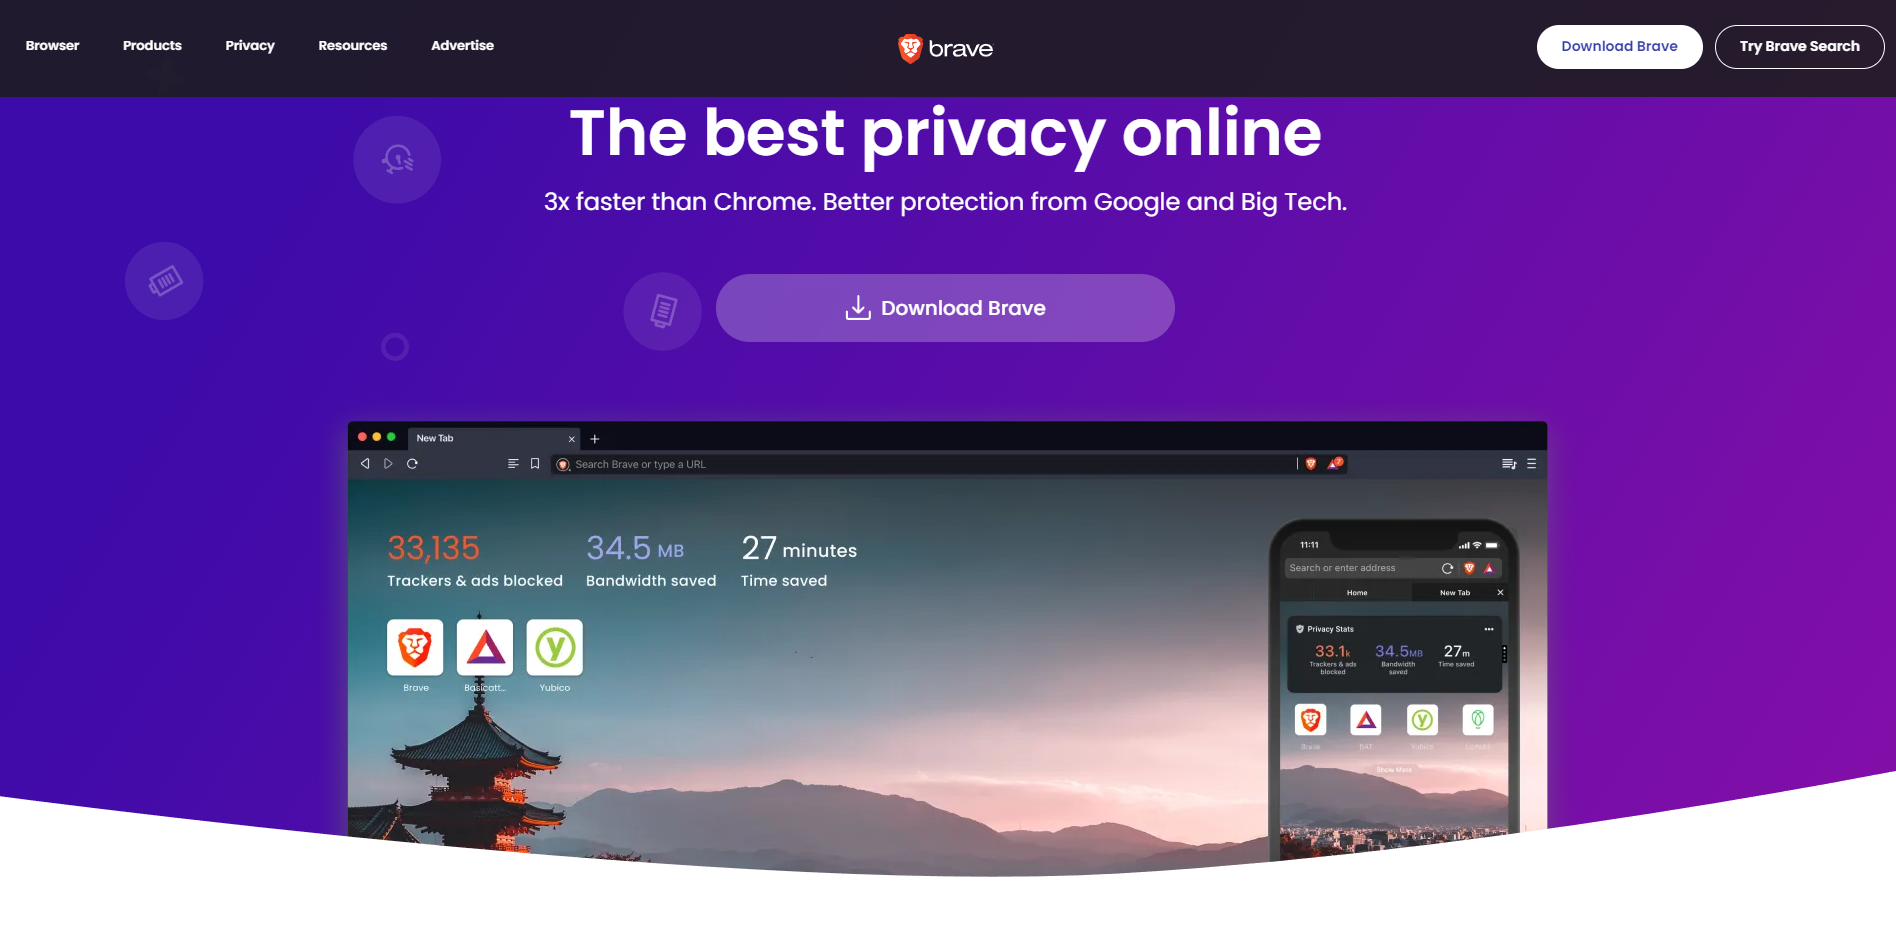 Brave browser is an example of a successful Web 3 business